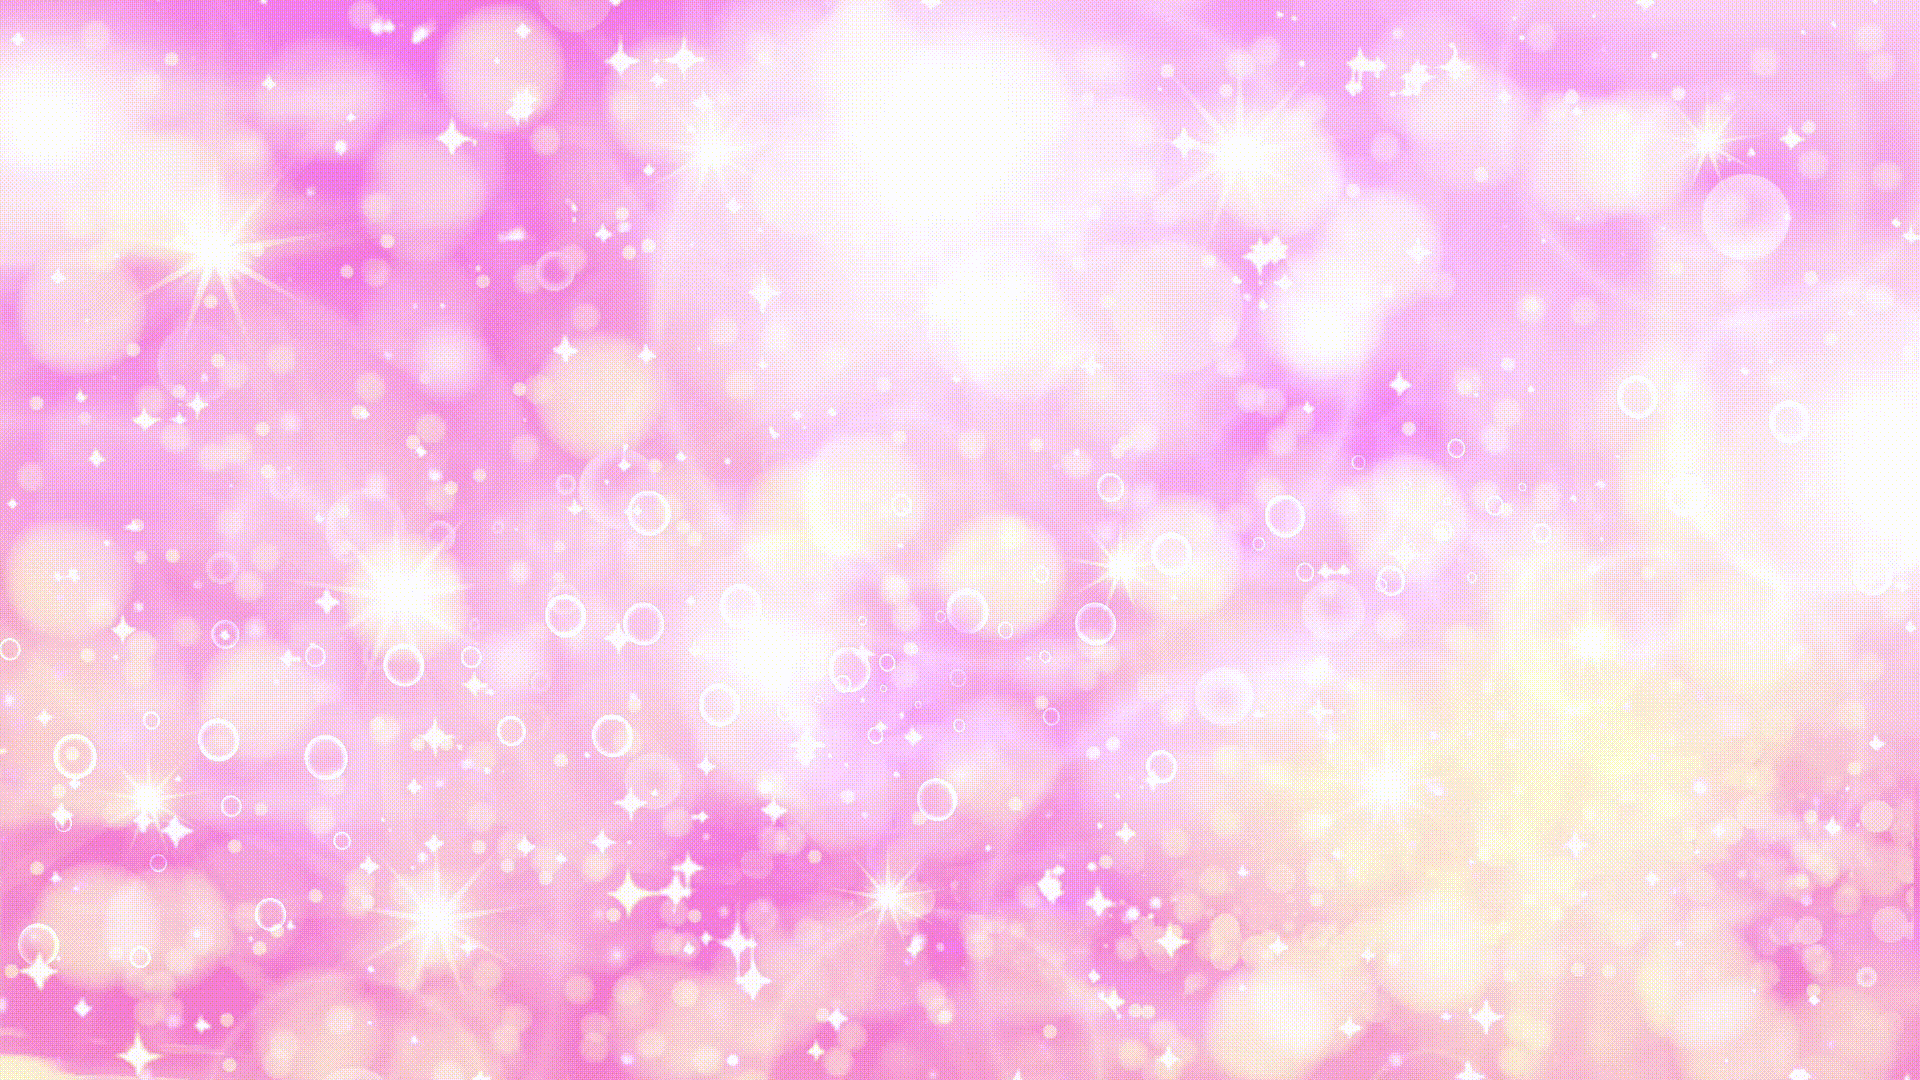 Sailor Moon Glitter Background - Freya Amari's Ko-fi Shop - Ko-fi ❤️ Where  creators get support from fans through donations, memberships, shop sales  and more! The original 'Buy Me a Coffee' Page.